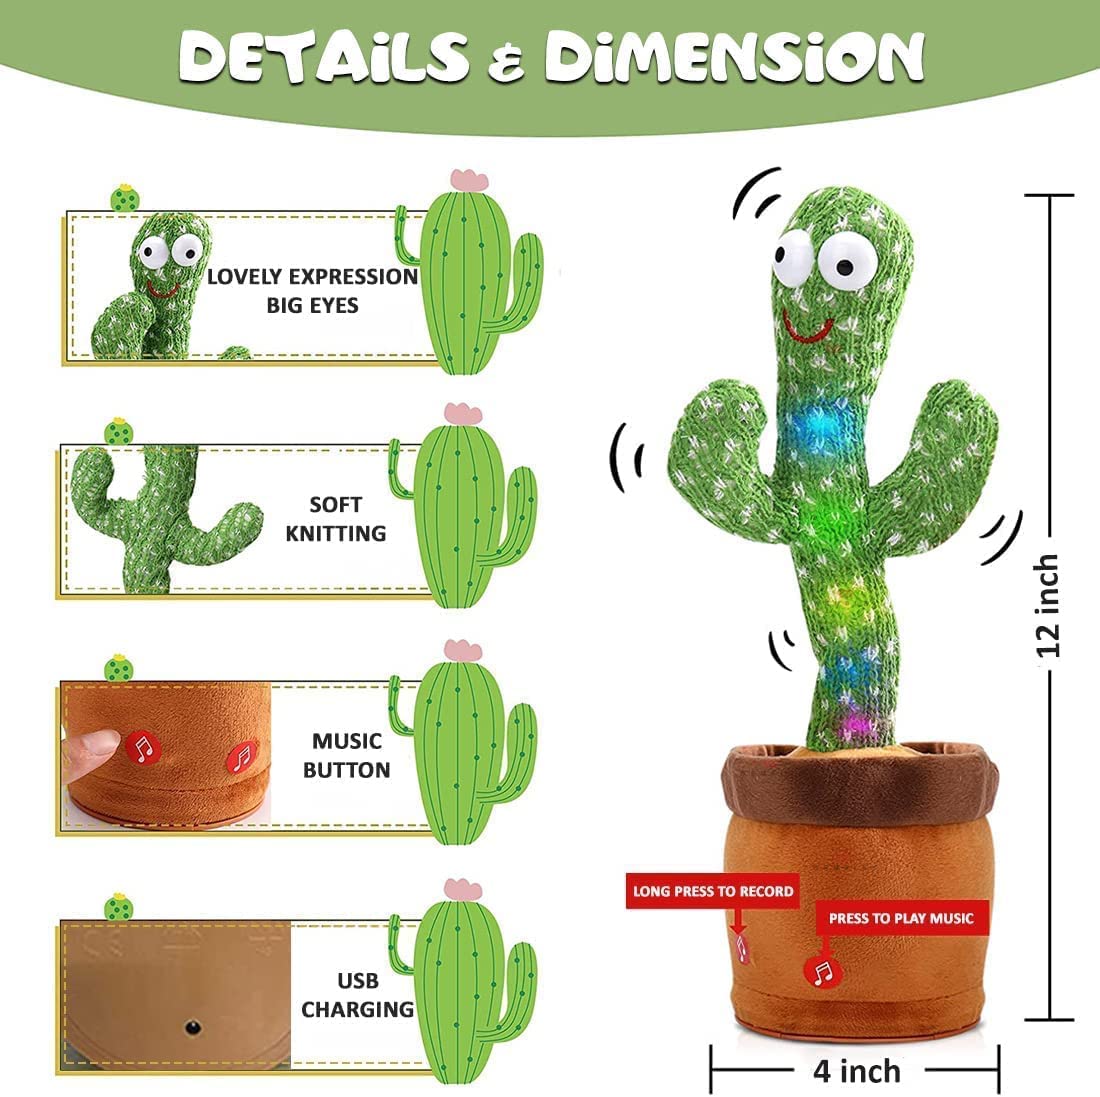 Dancing Cactus Toy for Babies & Kids Records & Repeats What You Say Singing & Talking Toy Beautiful LED Lights Funny Educational Plush Decoration Item